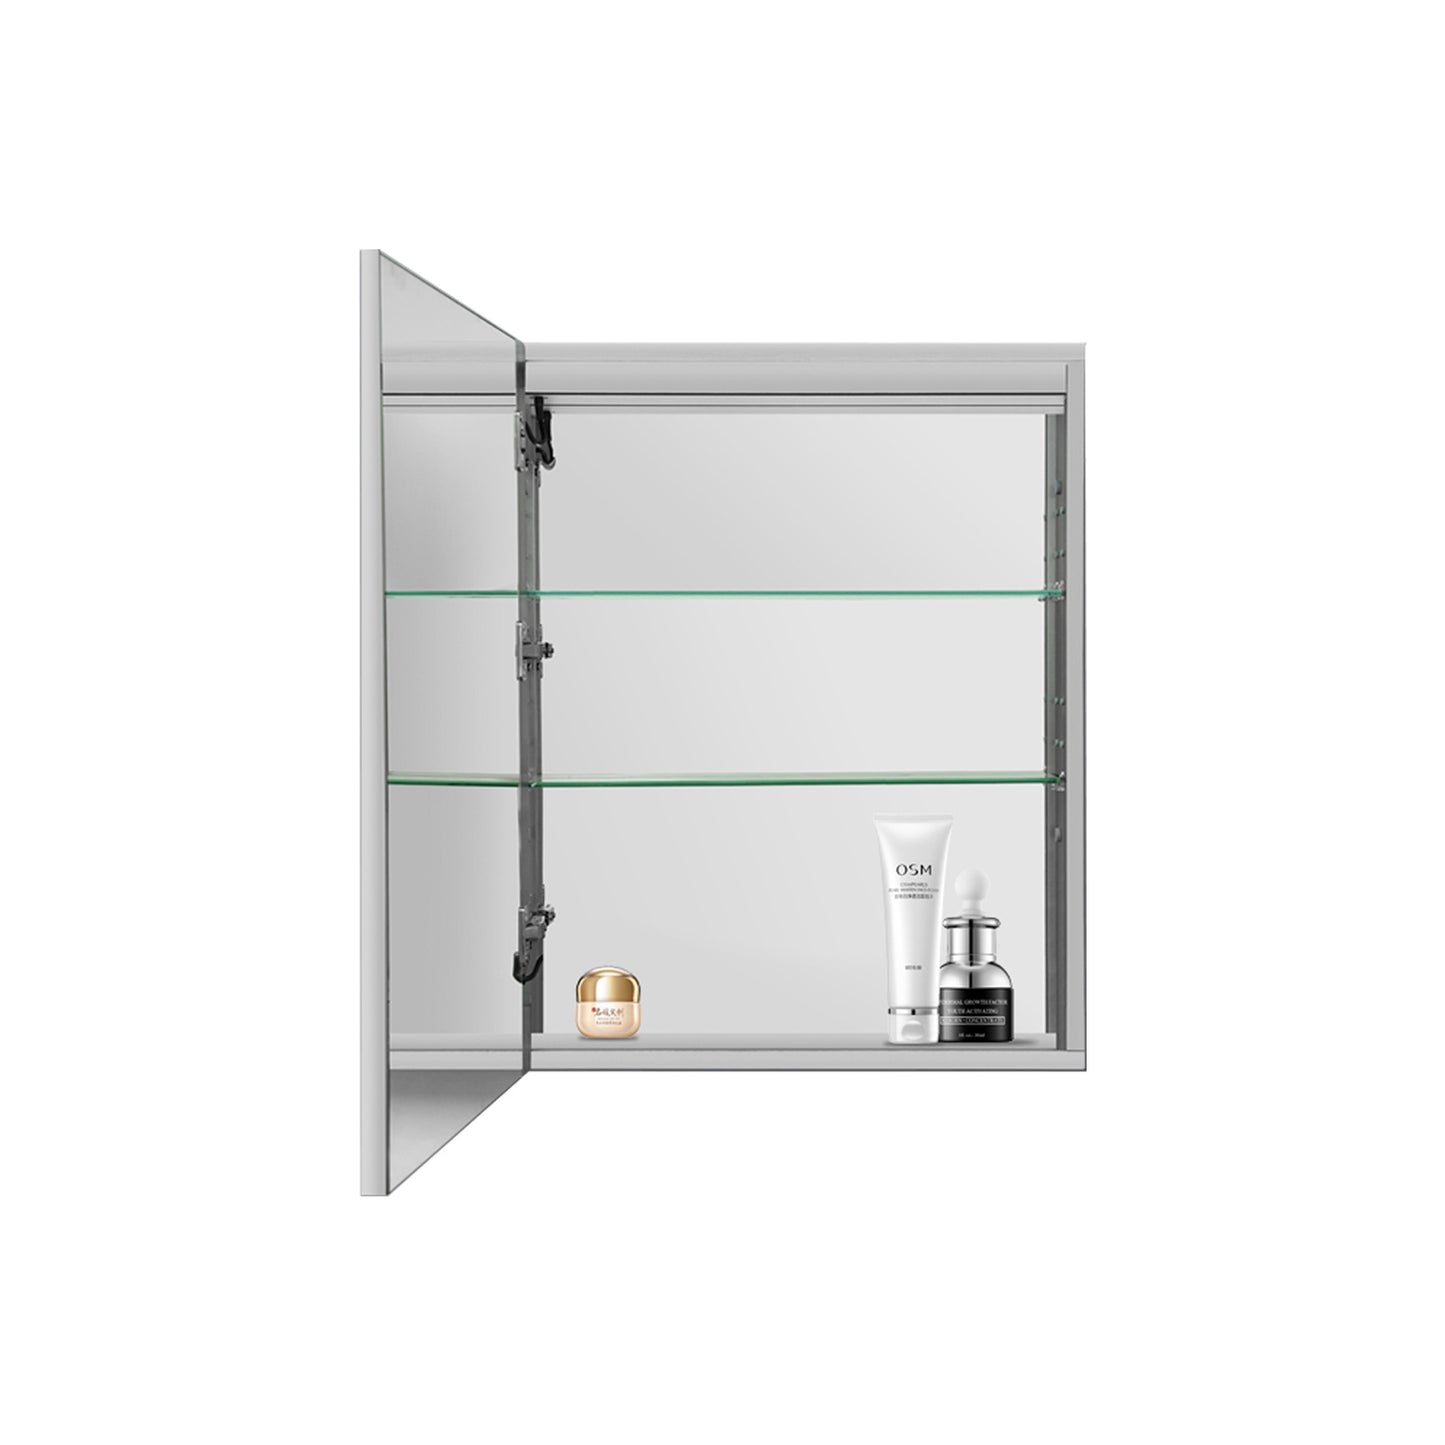 24x30 inch Rectangular LED Lighted Bathroom Medicine Cabinet with Mirror, Anti-Fog, Dimmable Lights, and Aluminum Frame